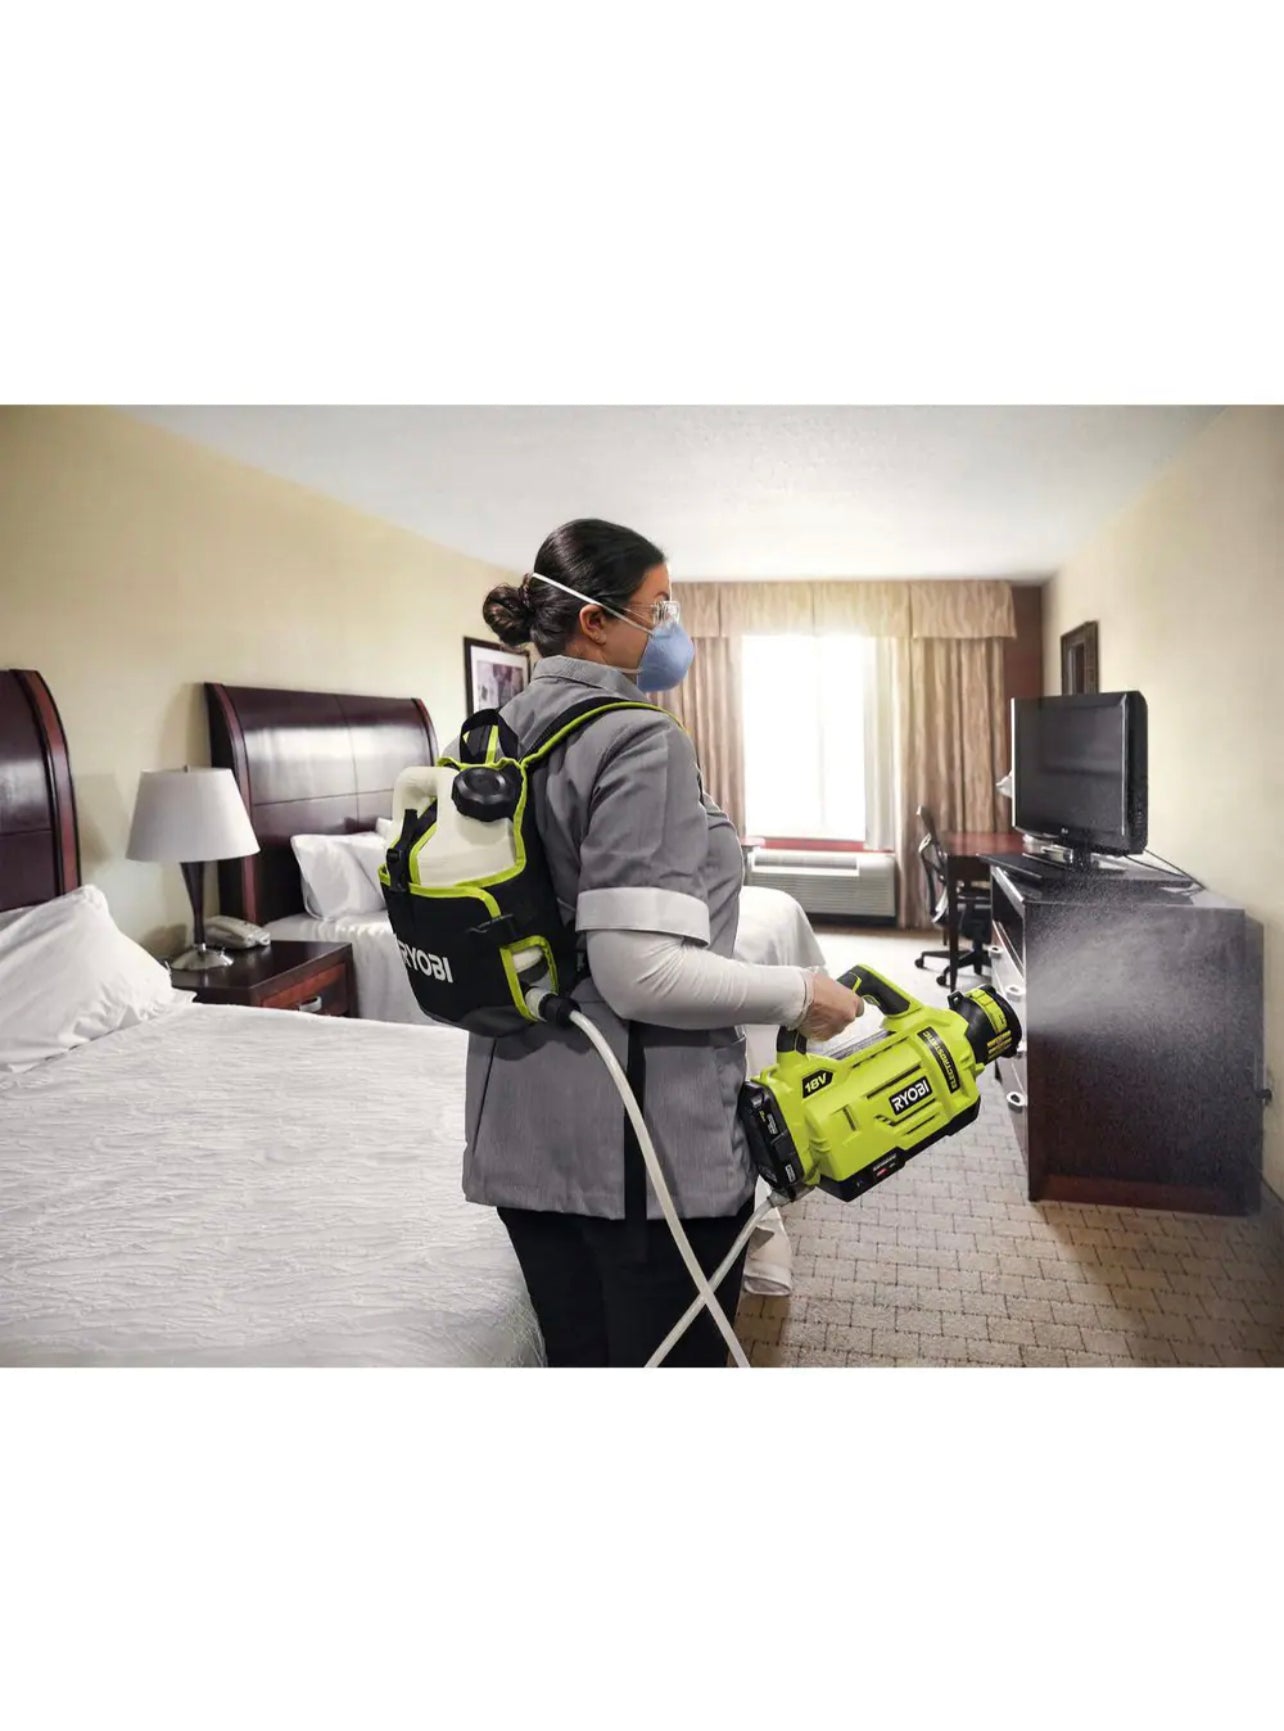 Ryobi One Plus 18V Cordless Electrostatic 1 Gal. Sprayer Kit with (2) 2.0 Ah Batteries and (1) Charger Damaged Box